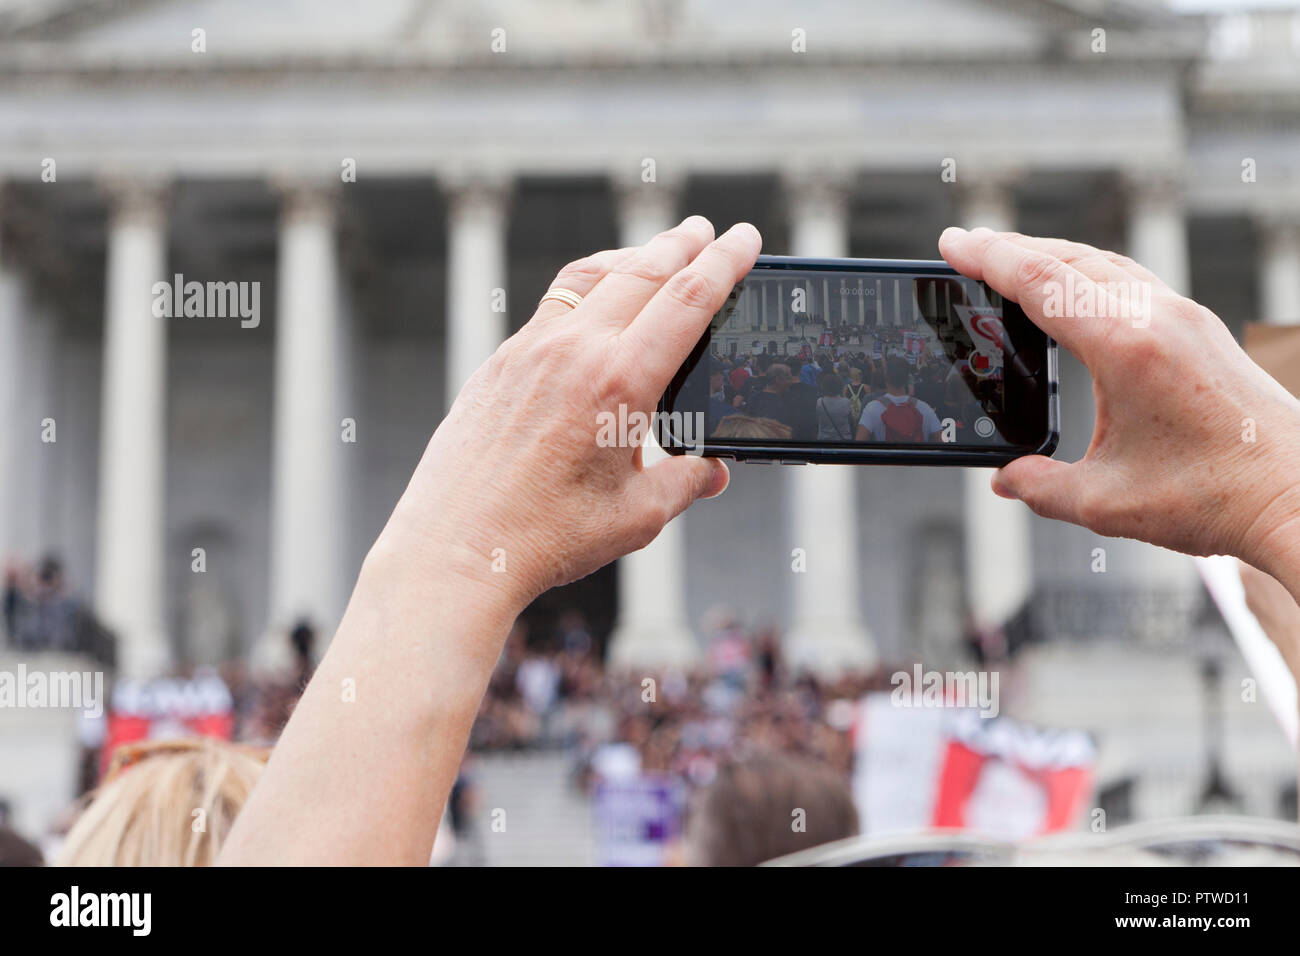 Woman recording video of political protest using a mobile phone (iPhone) - USA Stock Photo